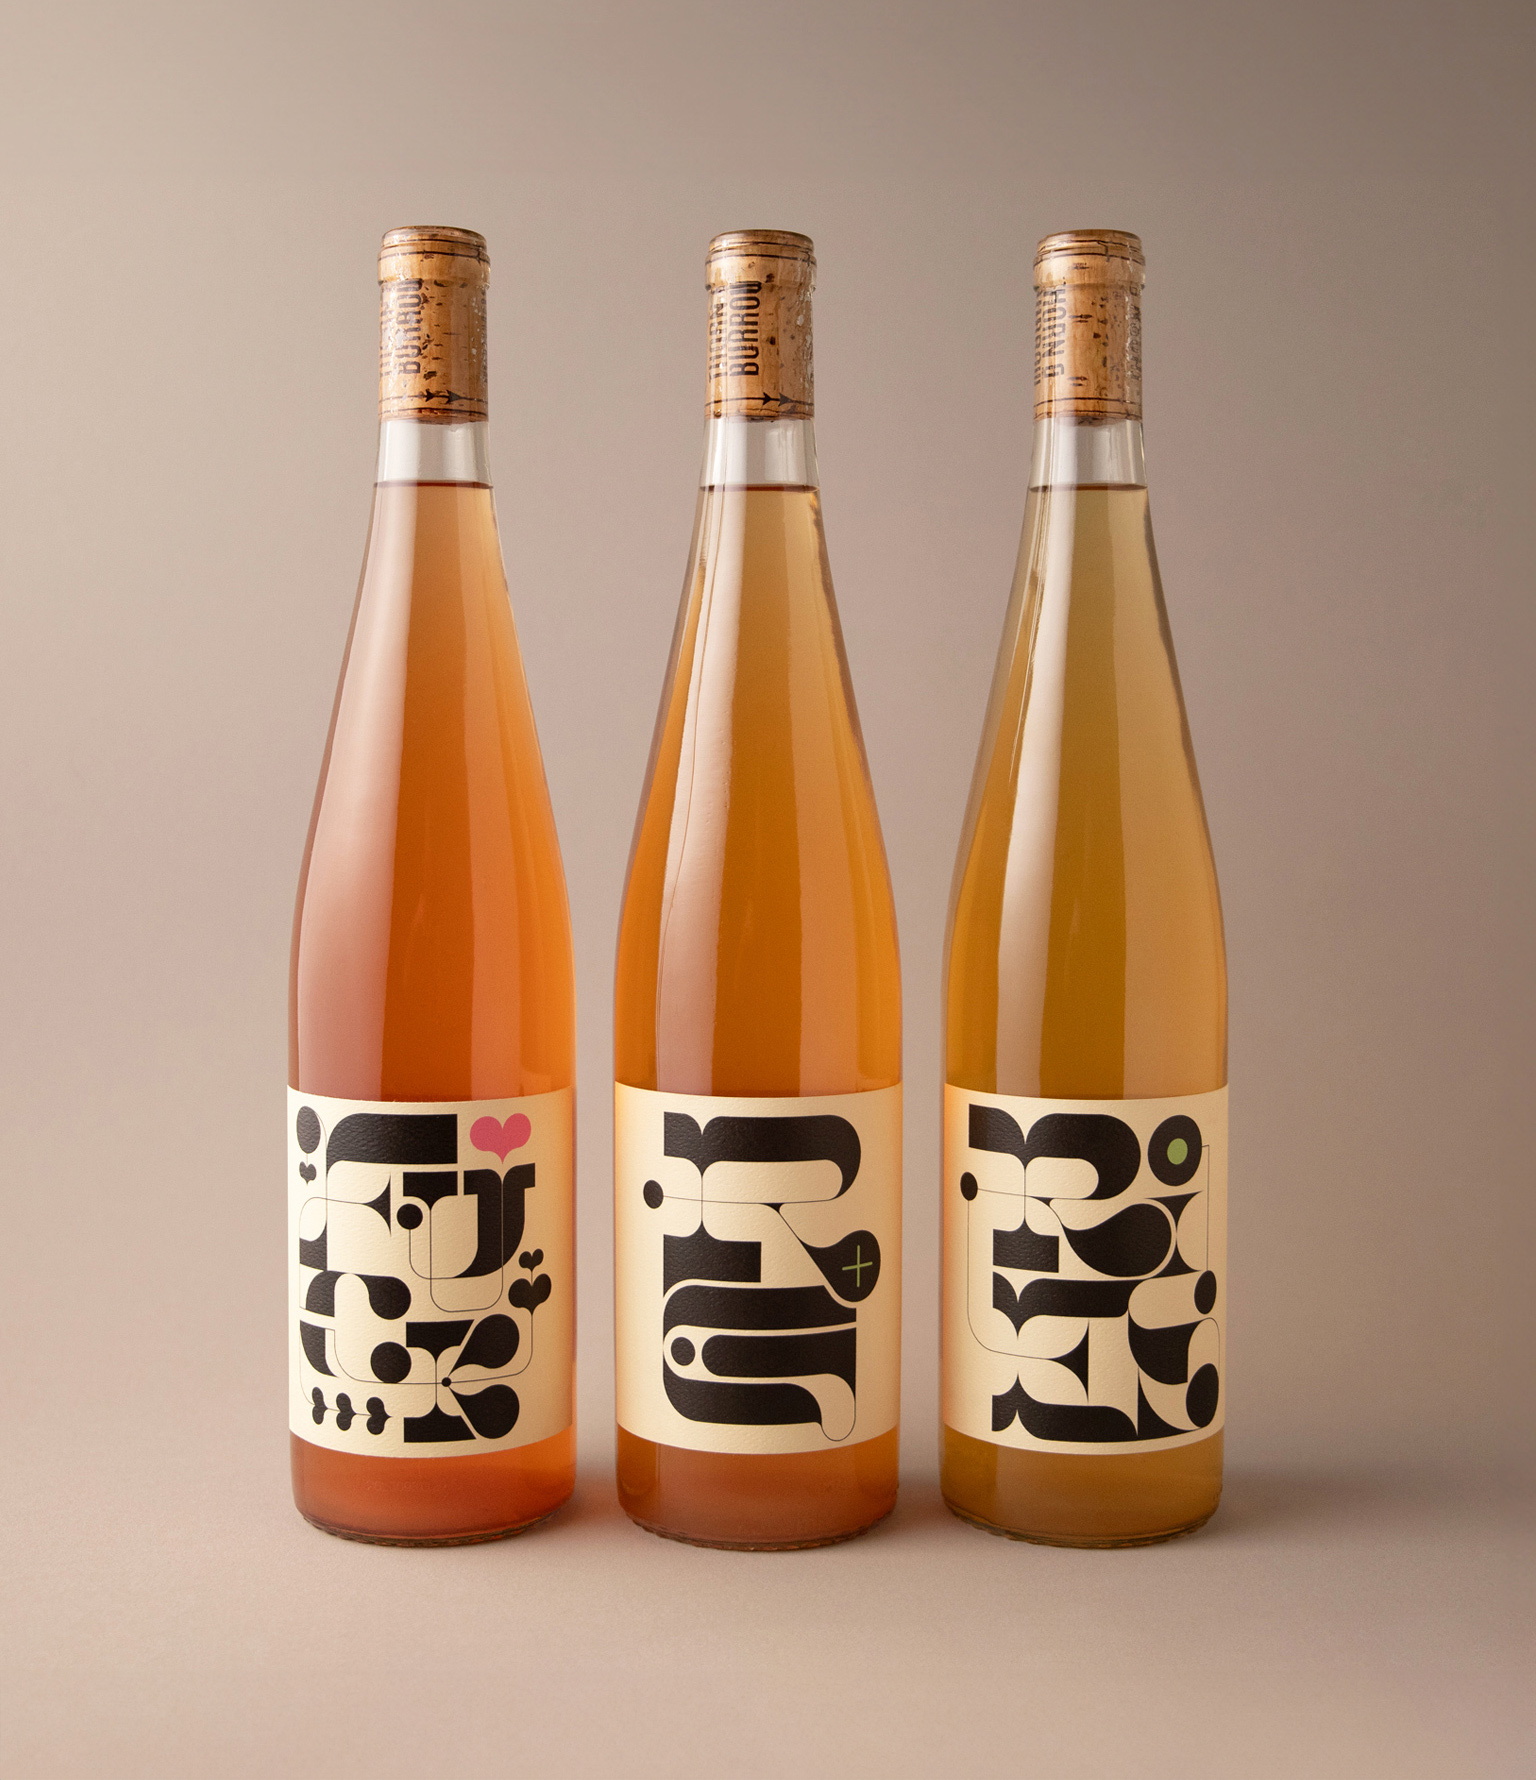 3 bottles of white wine with funky label design